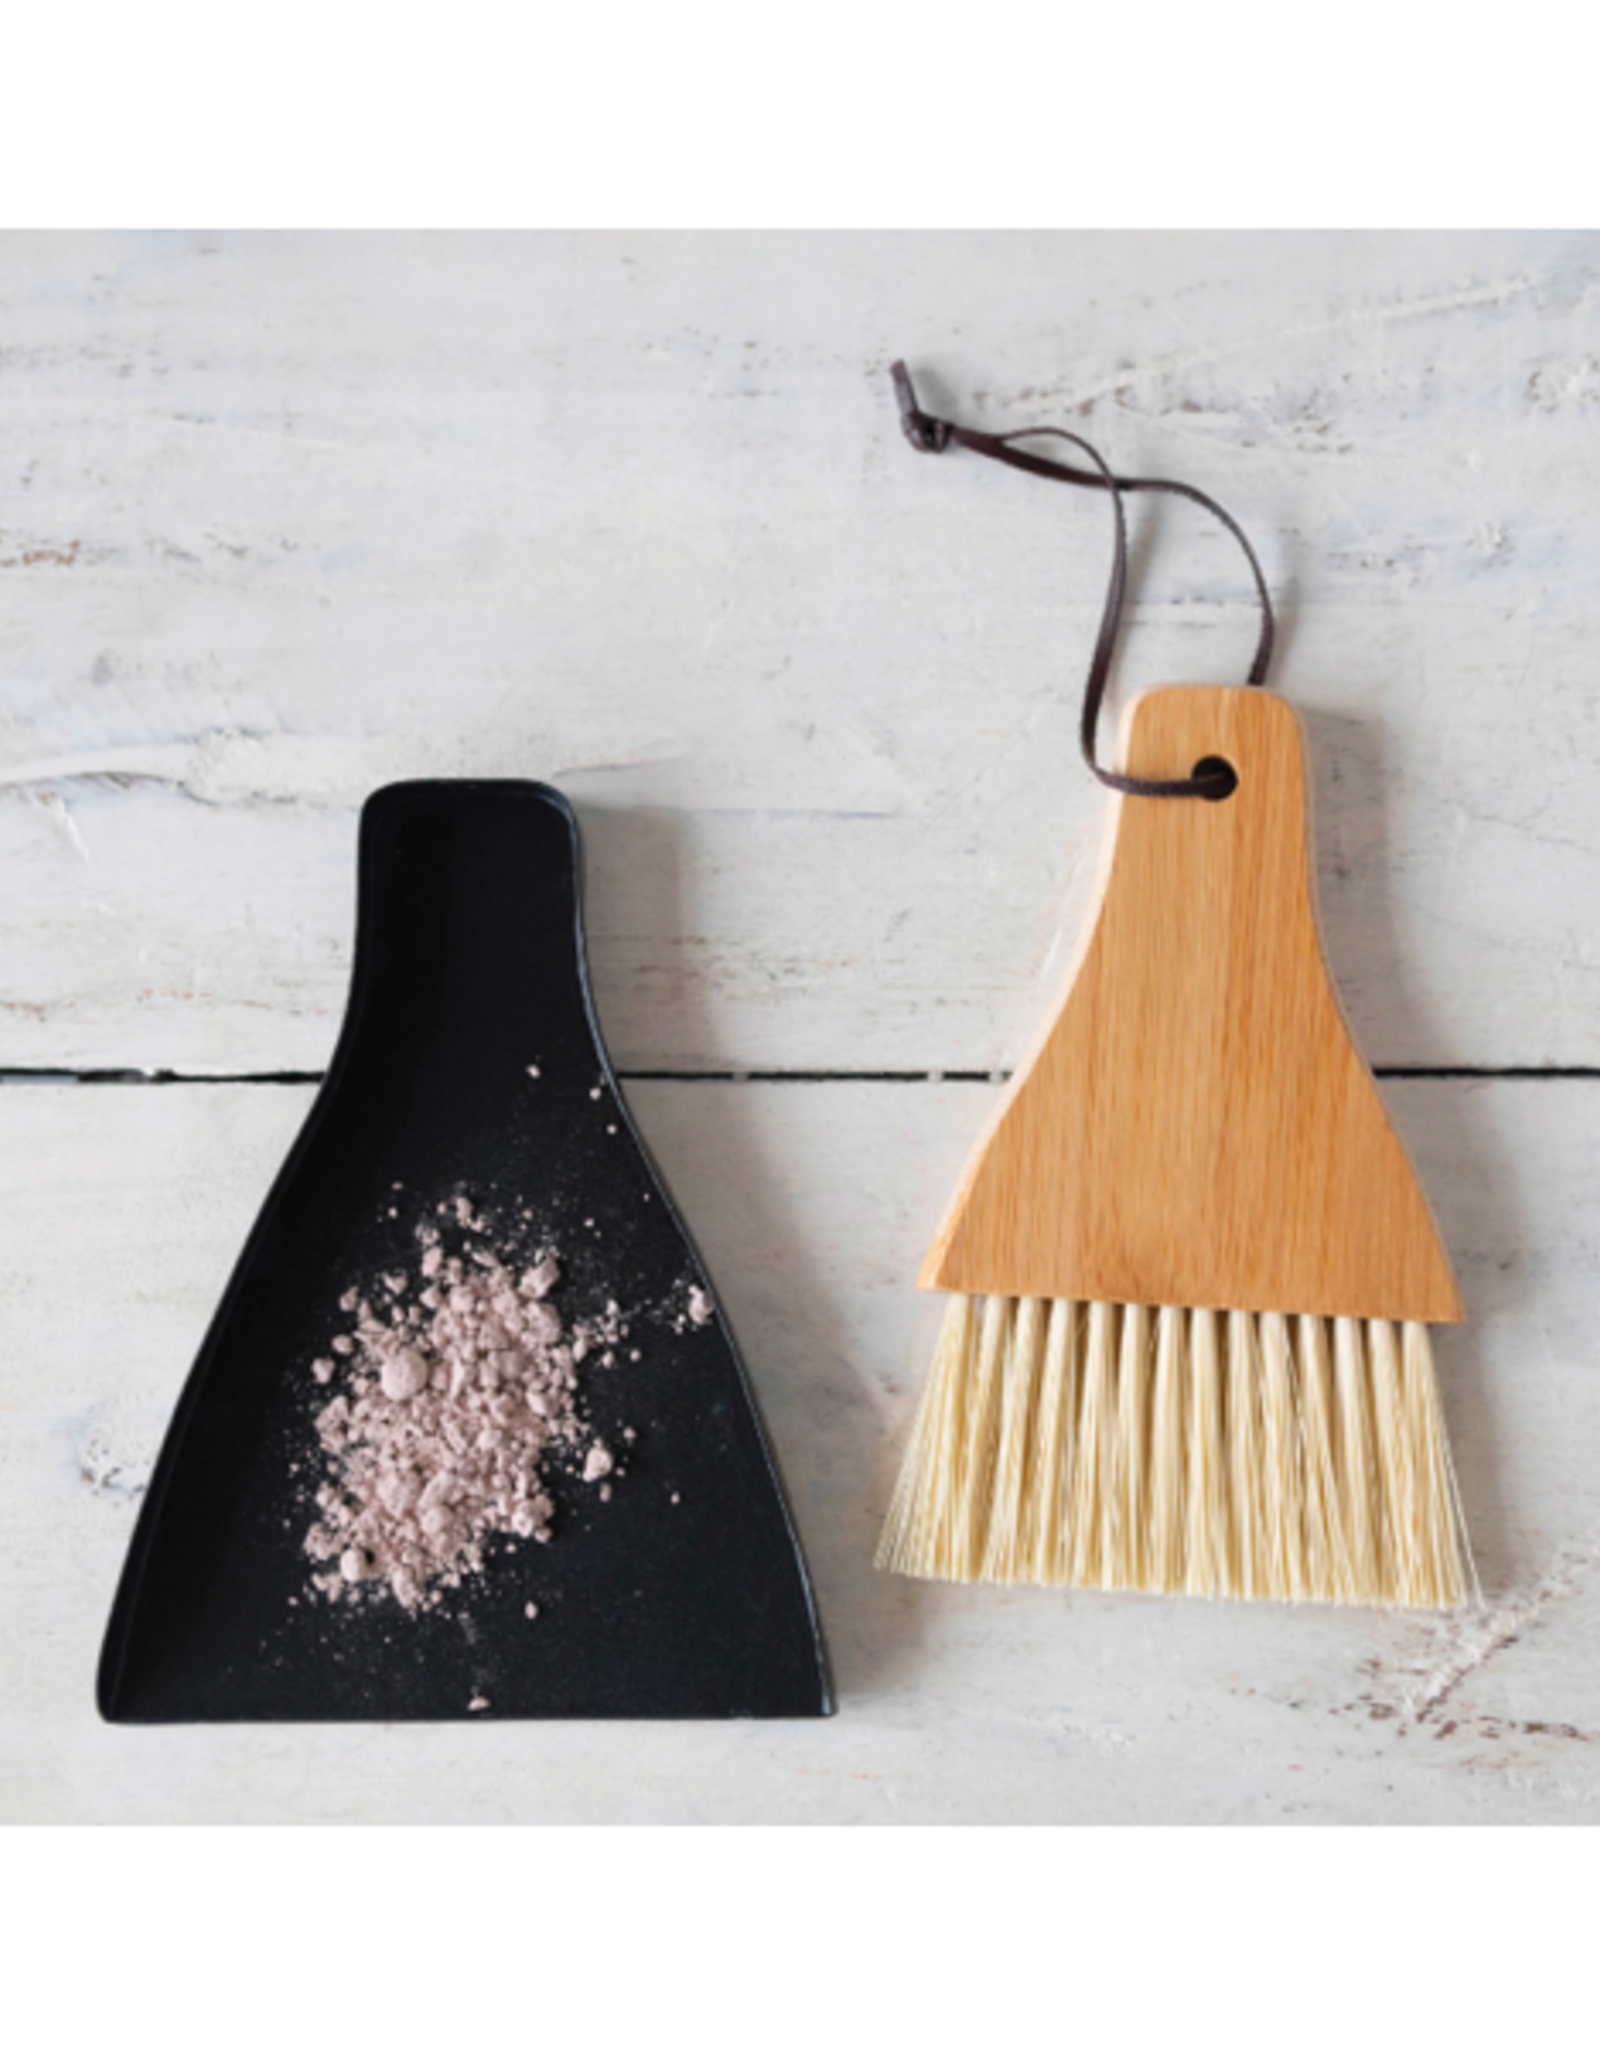 Broom and Dustpan Set Dustpan and Broom with Long Handle Upright Stand Up Dustpan  Broom Combo